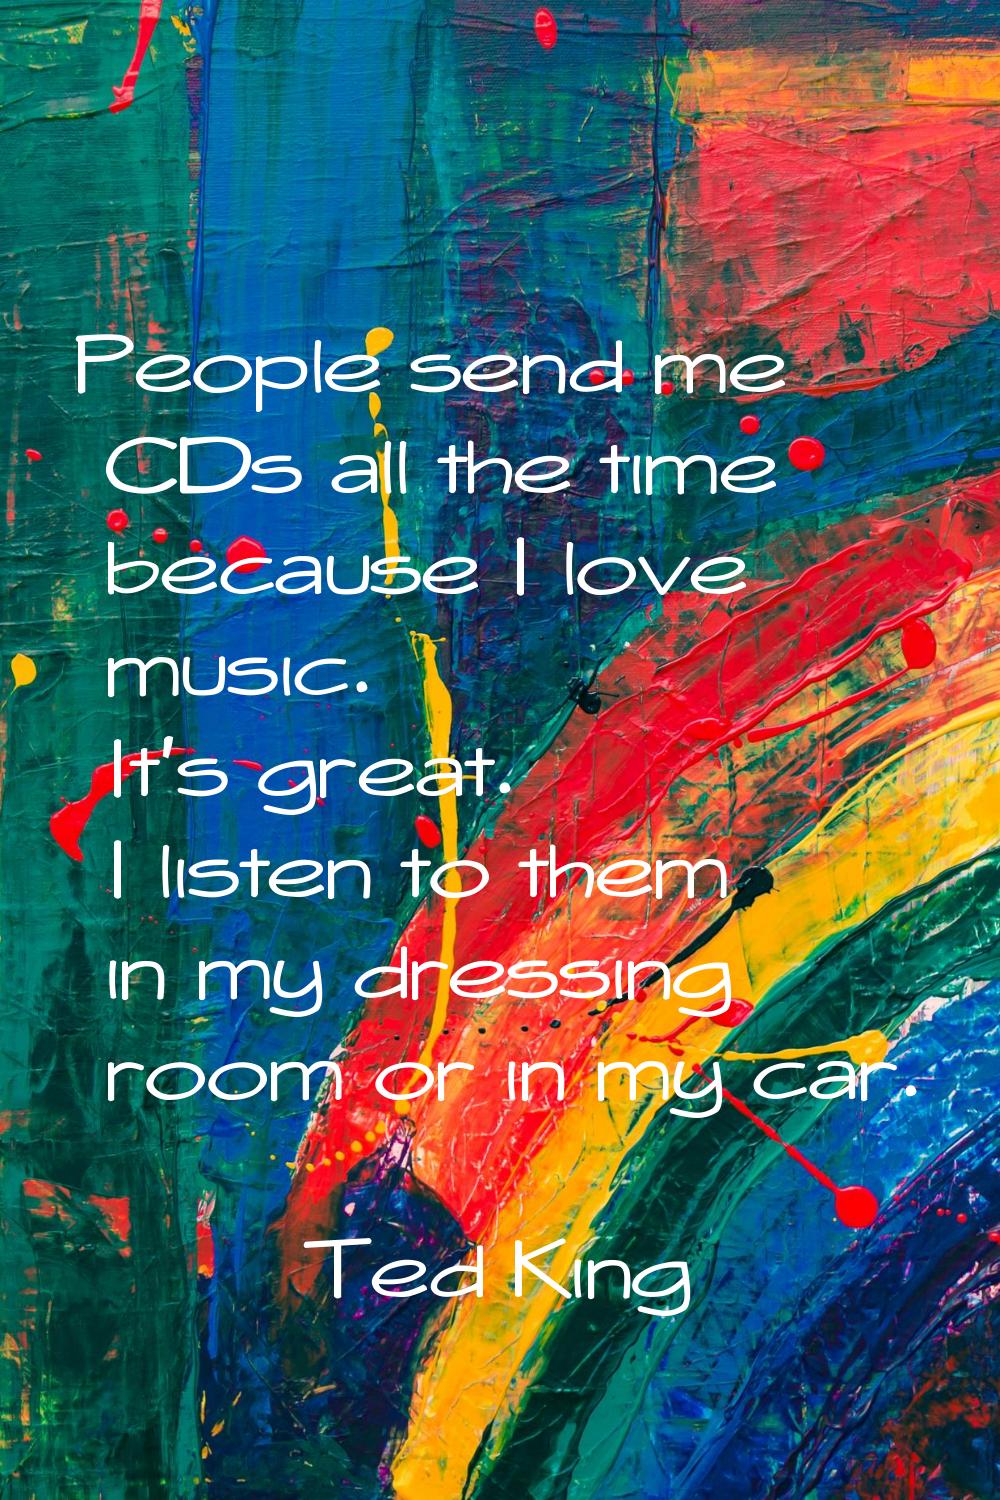 People send me CDs all the time because I love music. It's great. I listen to them in my dressing r